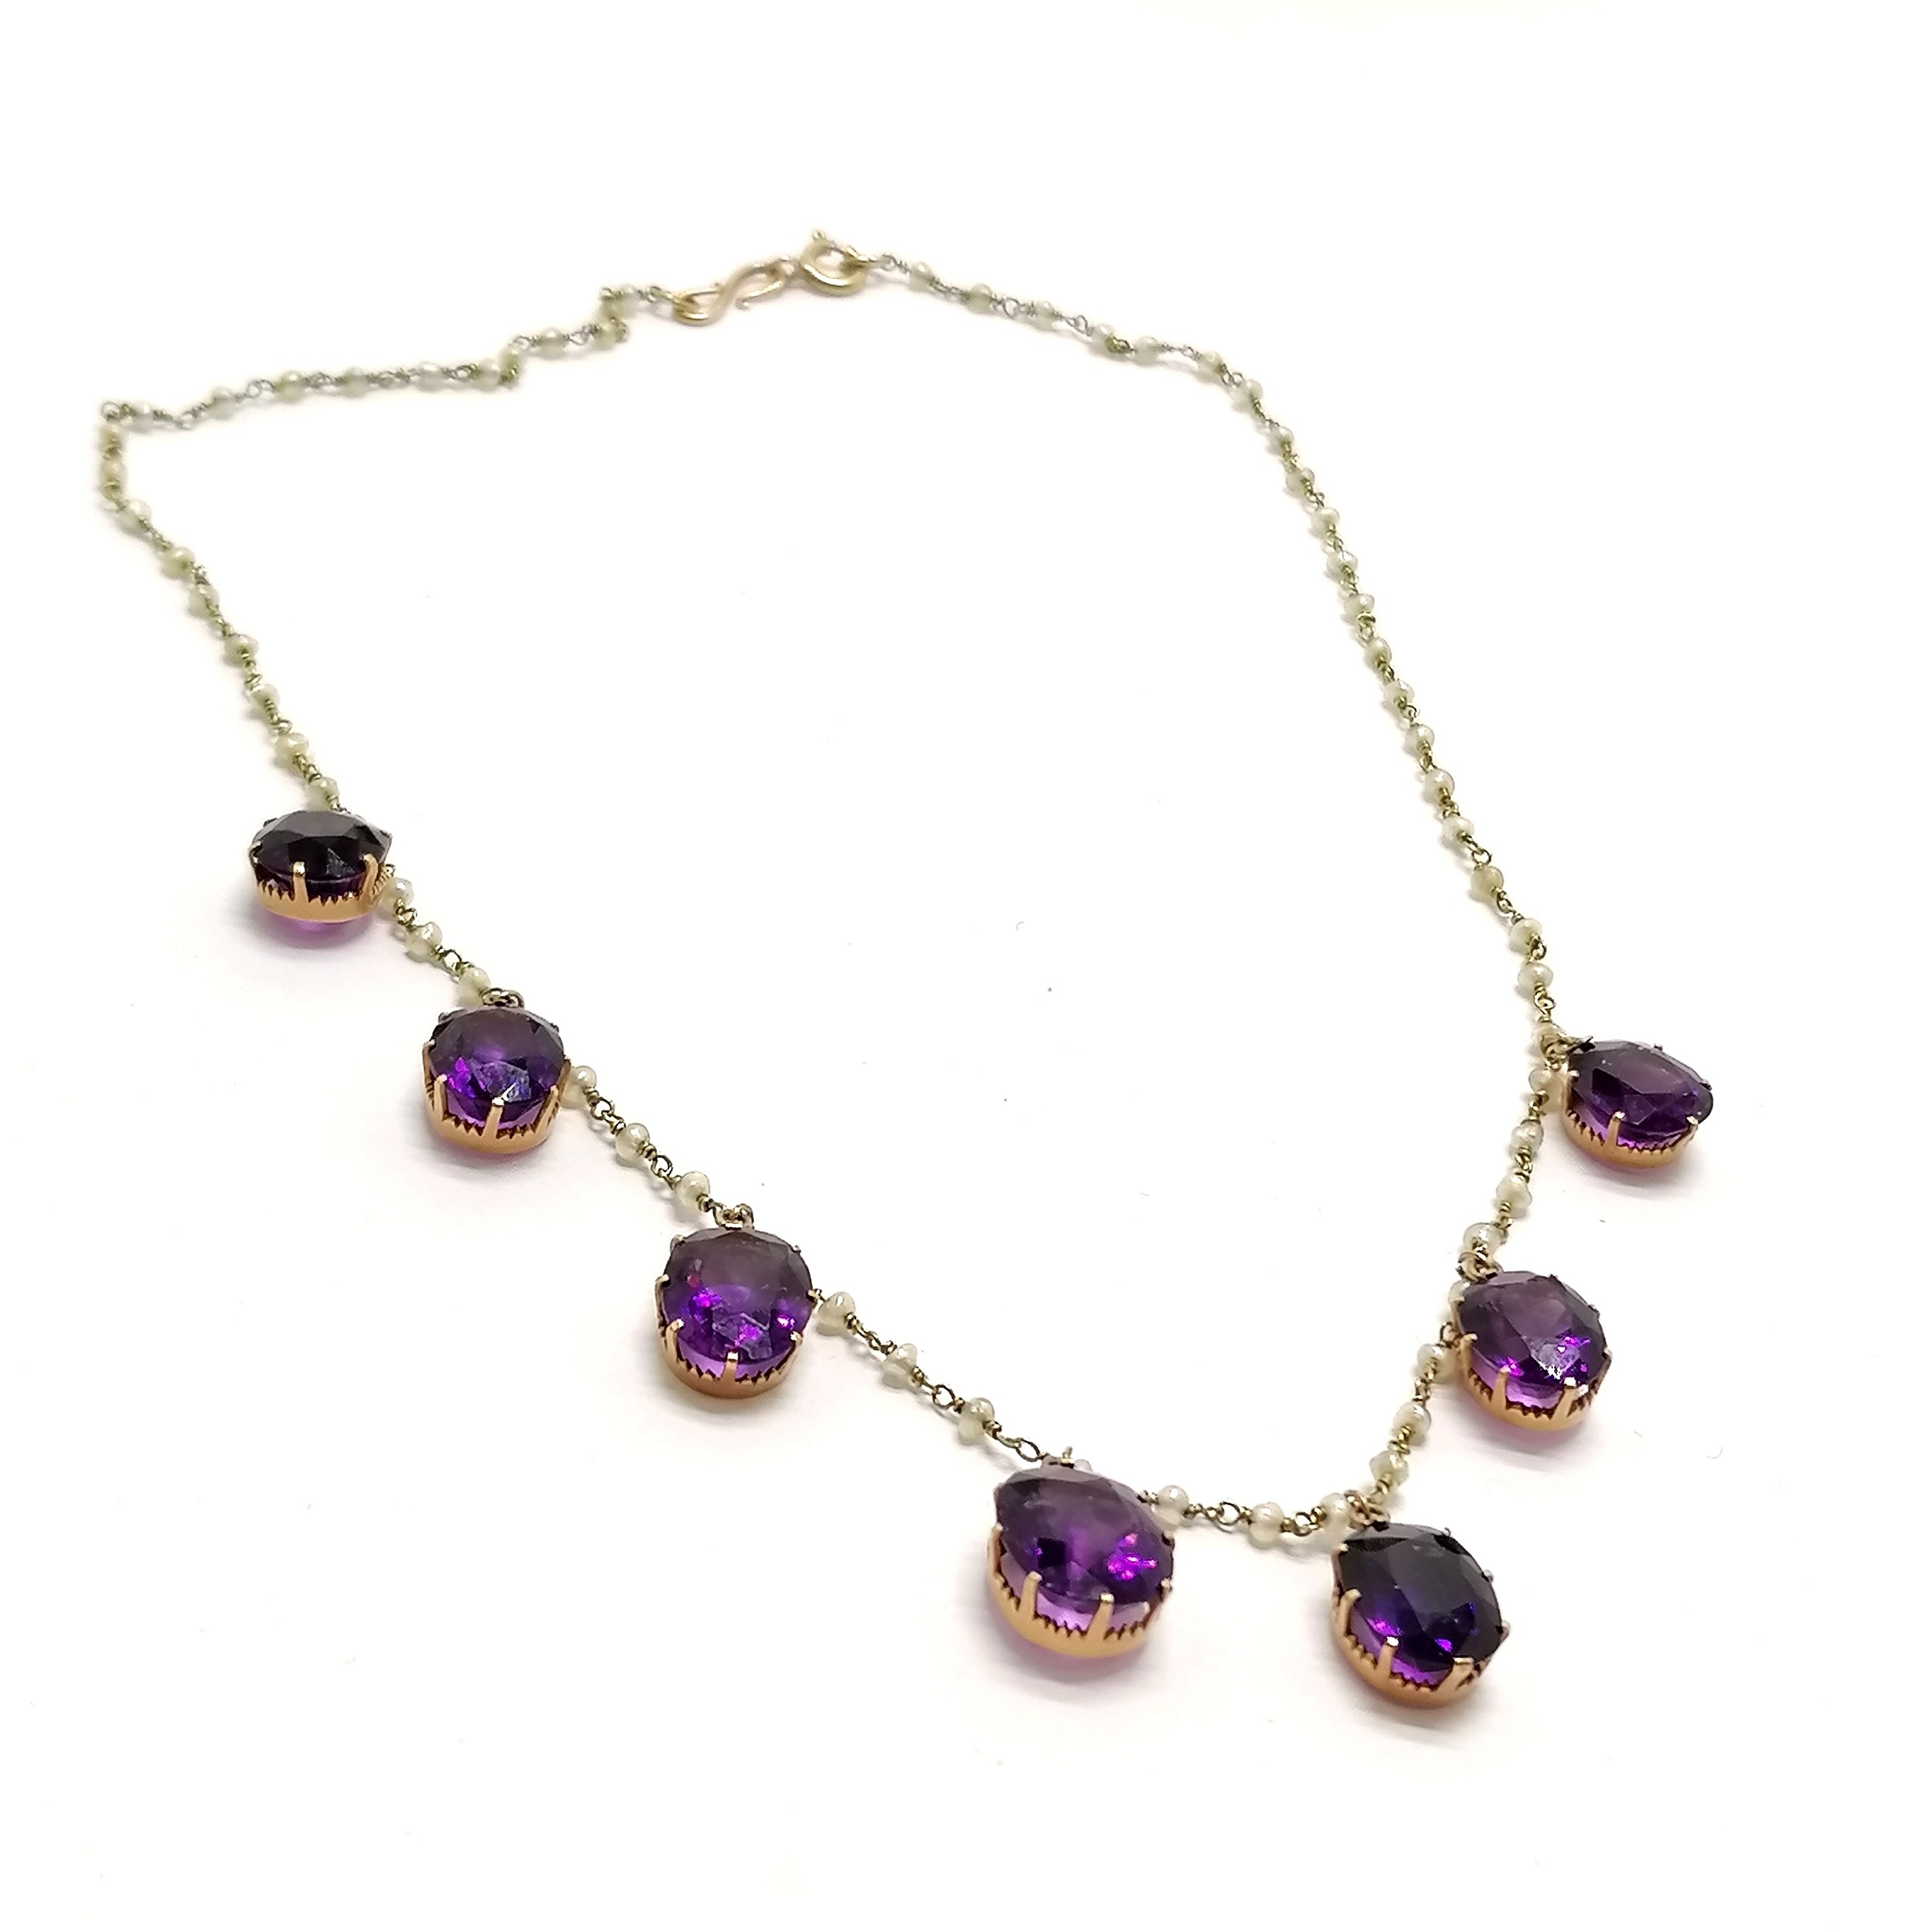 Antique unmarked gold seed pearl / amethyst stone set necklace - 39cm & 9.9g total weight in an - Image 5 of 8